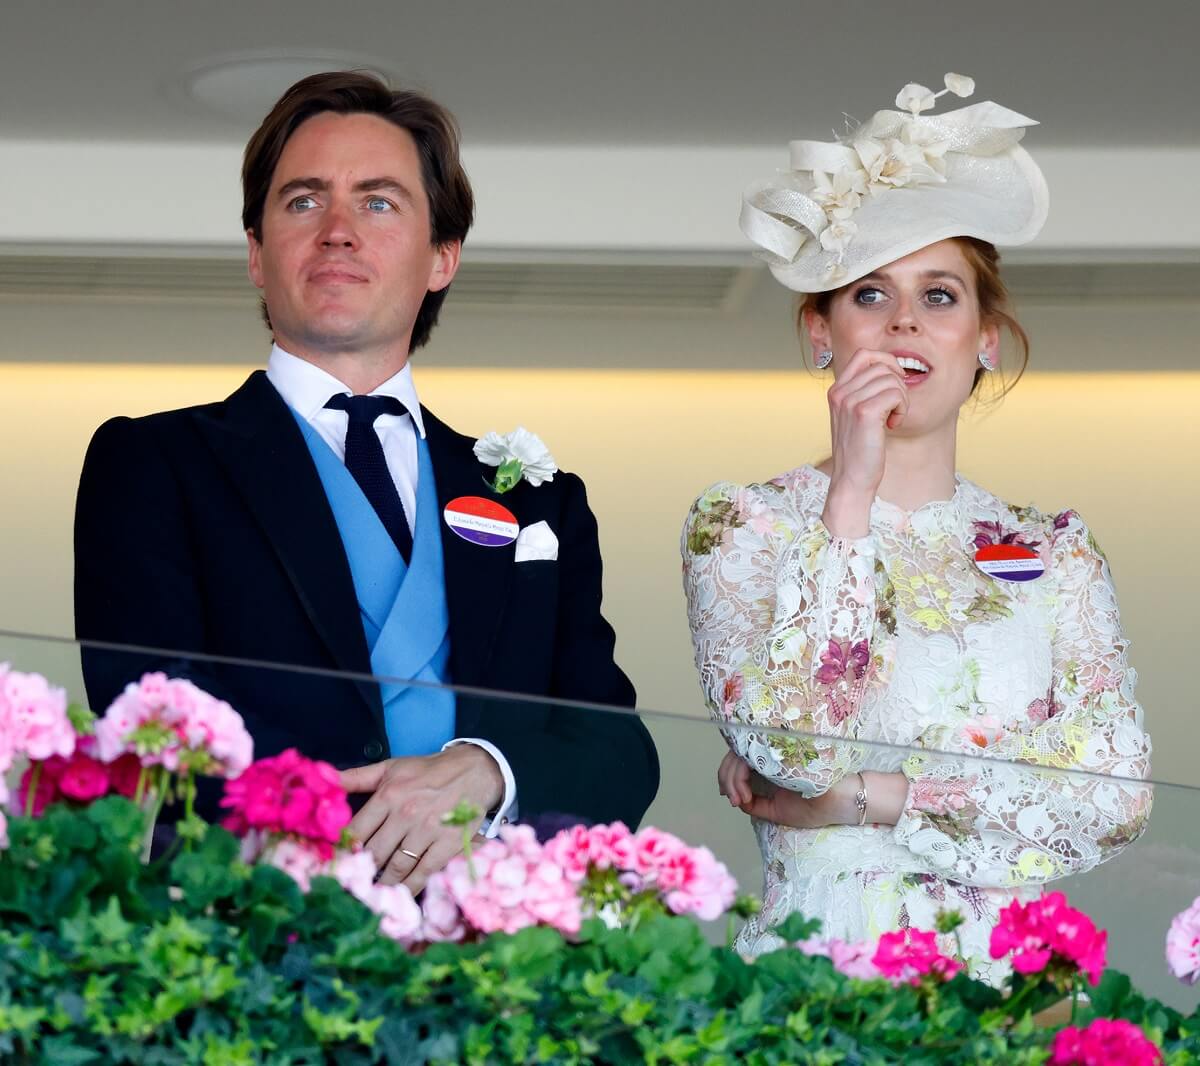 Edoardo Mapelli Mozzi and Princess Beatrice, who a psychic says will have 'past relationships comeback' while her marriage to Edo remains 'fiery,' watch the racing on day four of Royal Ascot